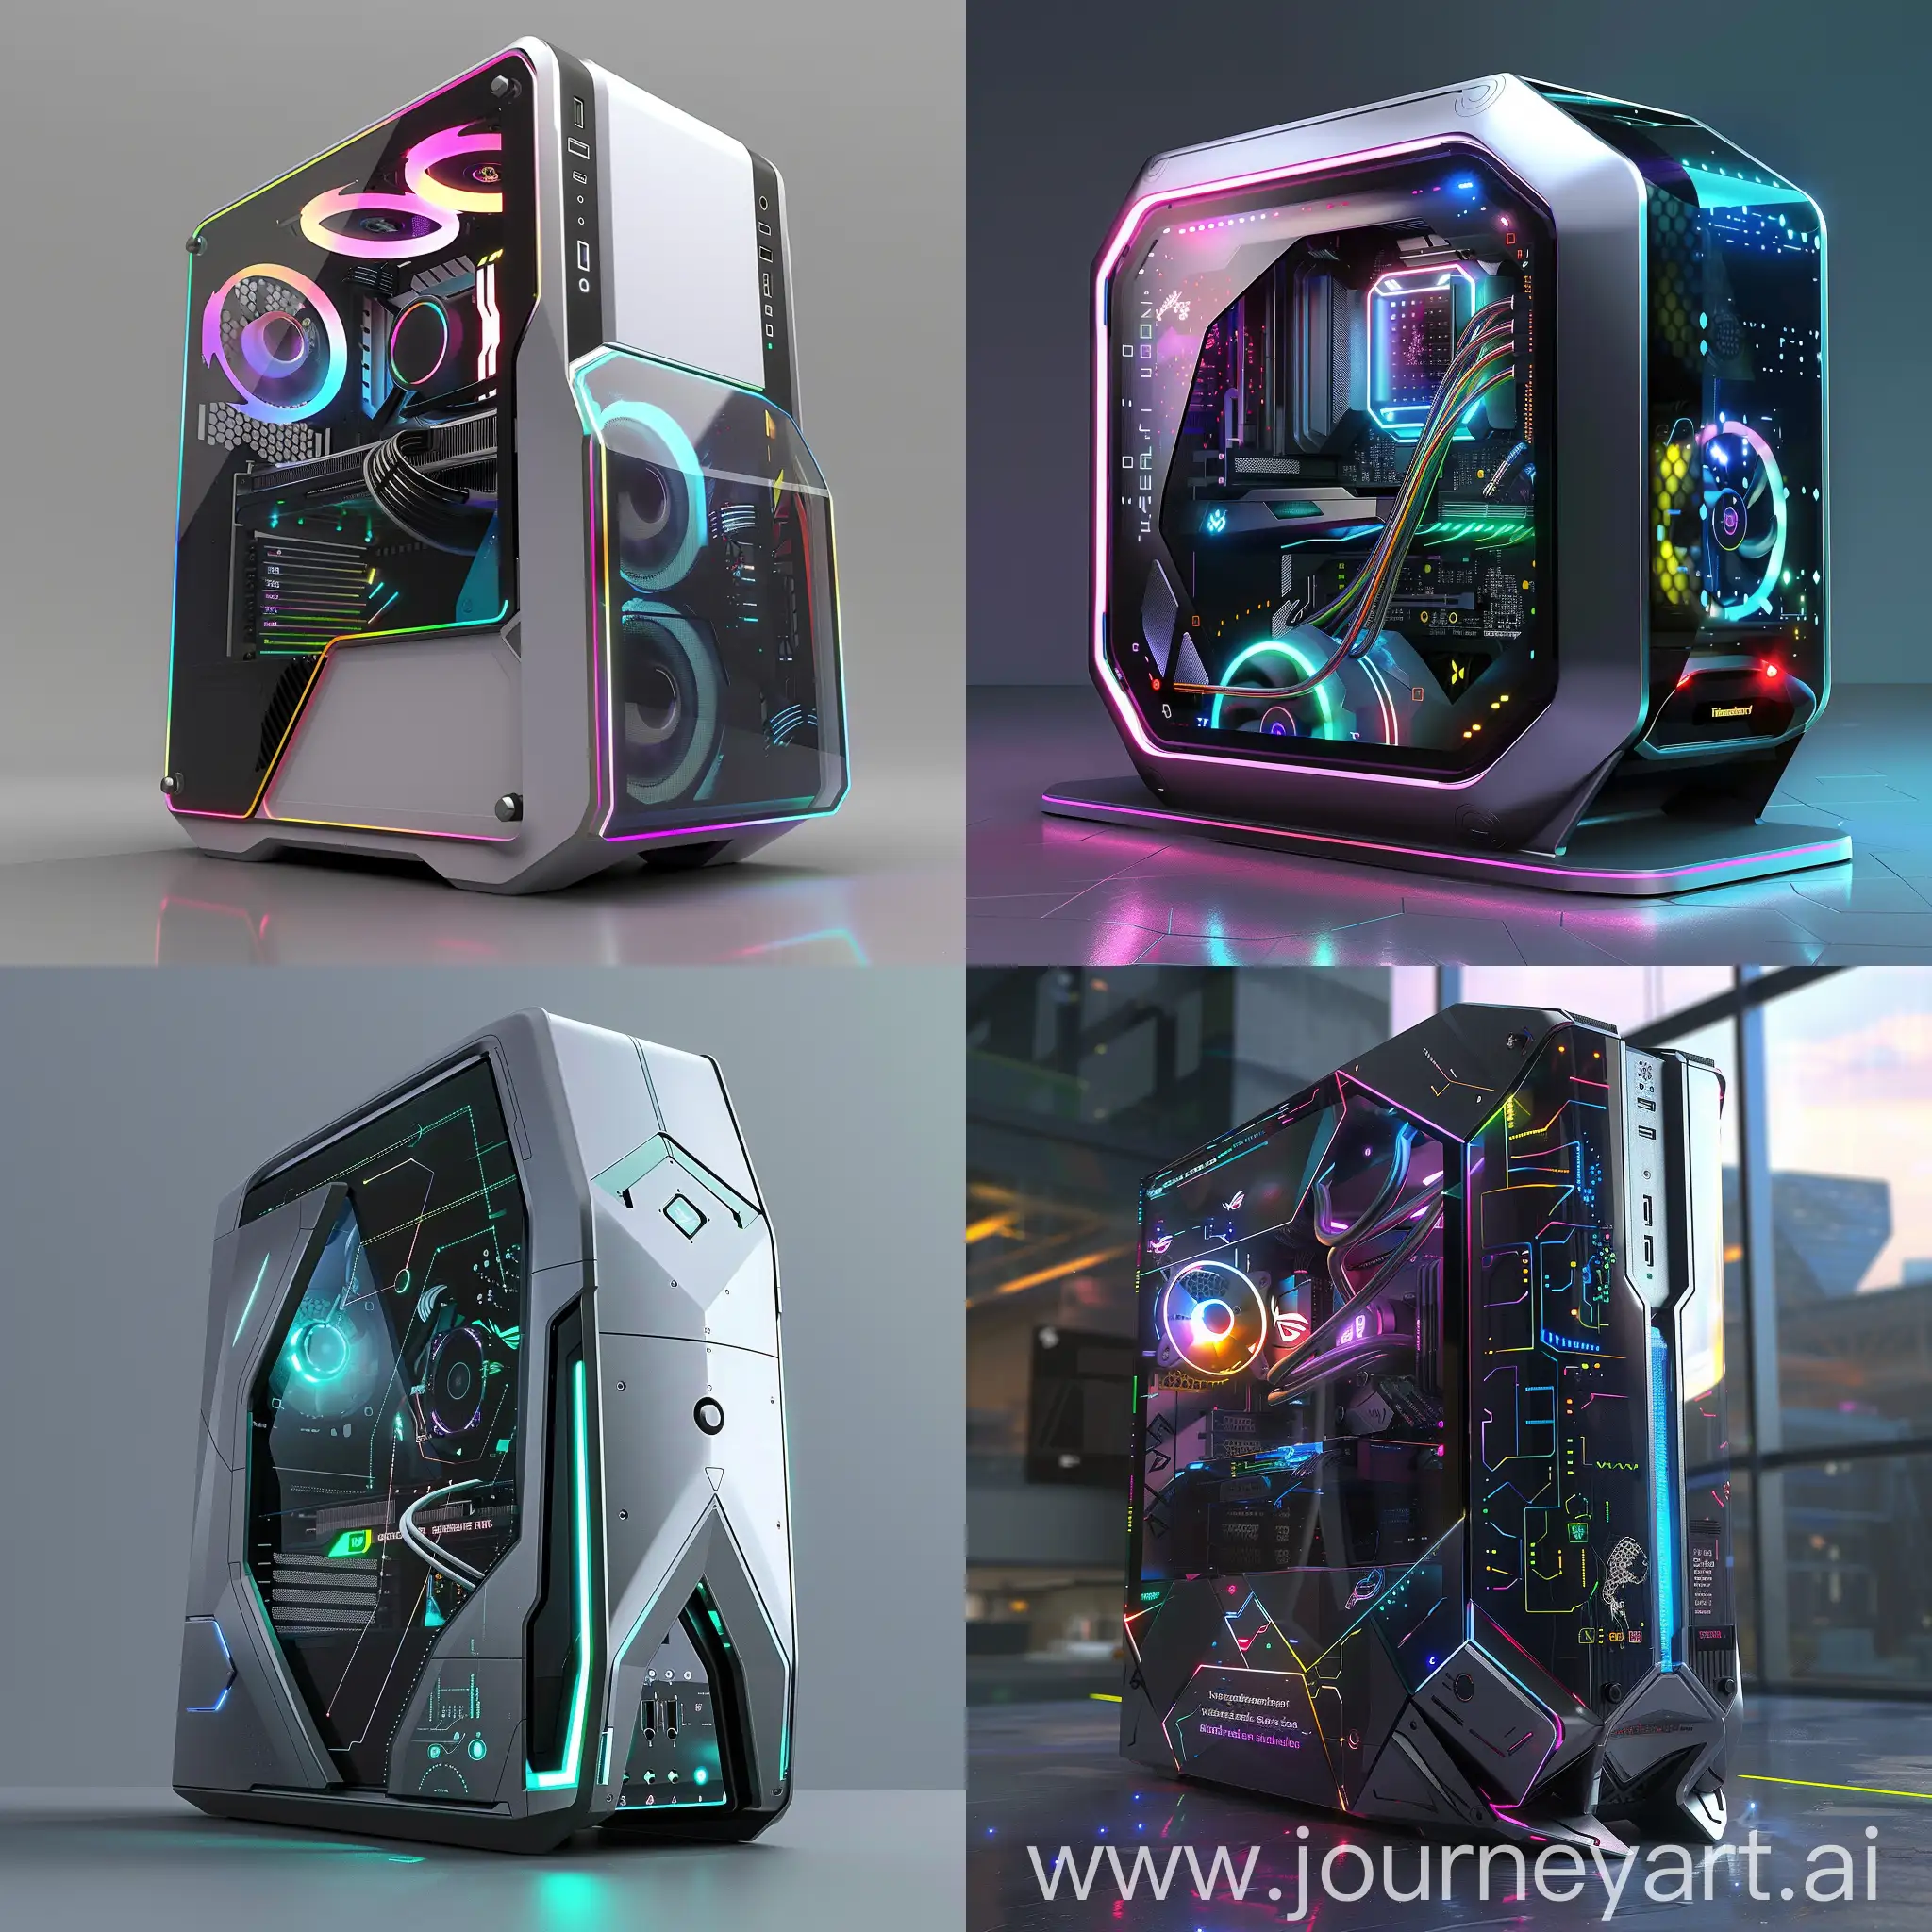 Futuristic-Modular-PC-Case-with-Integrated-Cooling-and-Smart-Features